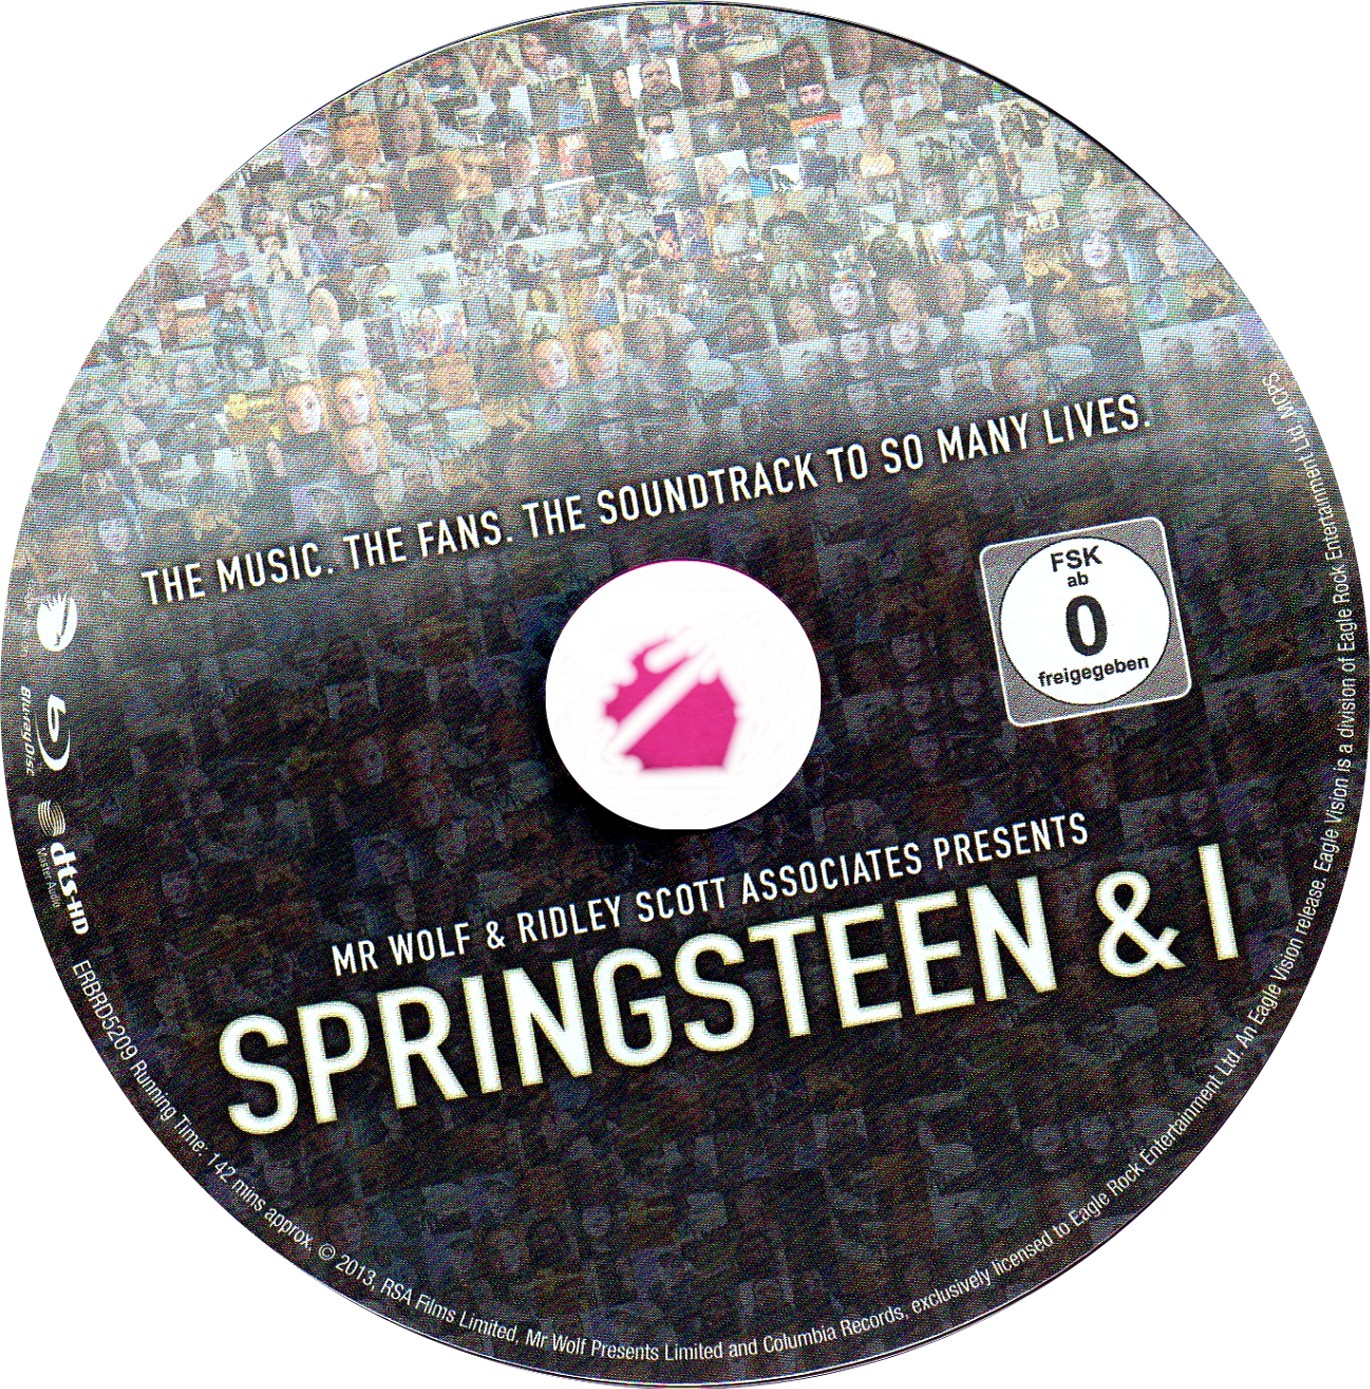 Springsteen and I (BLU-RAY)